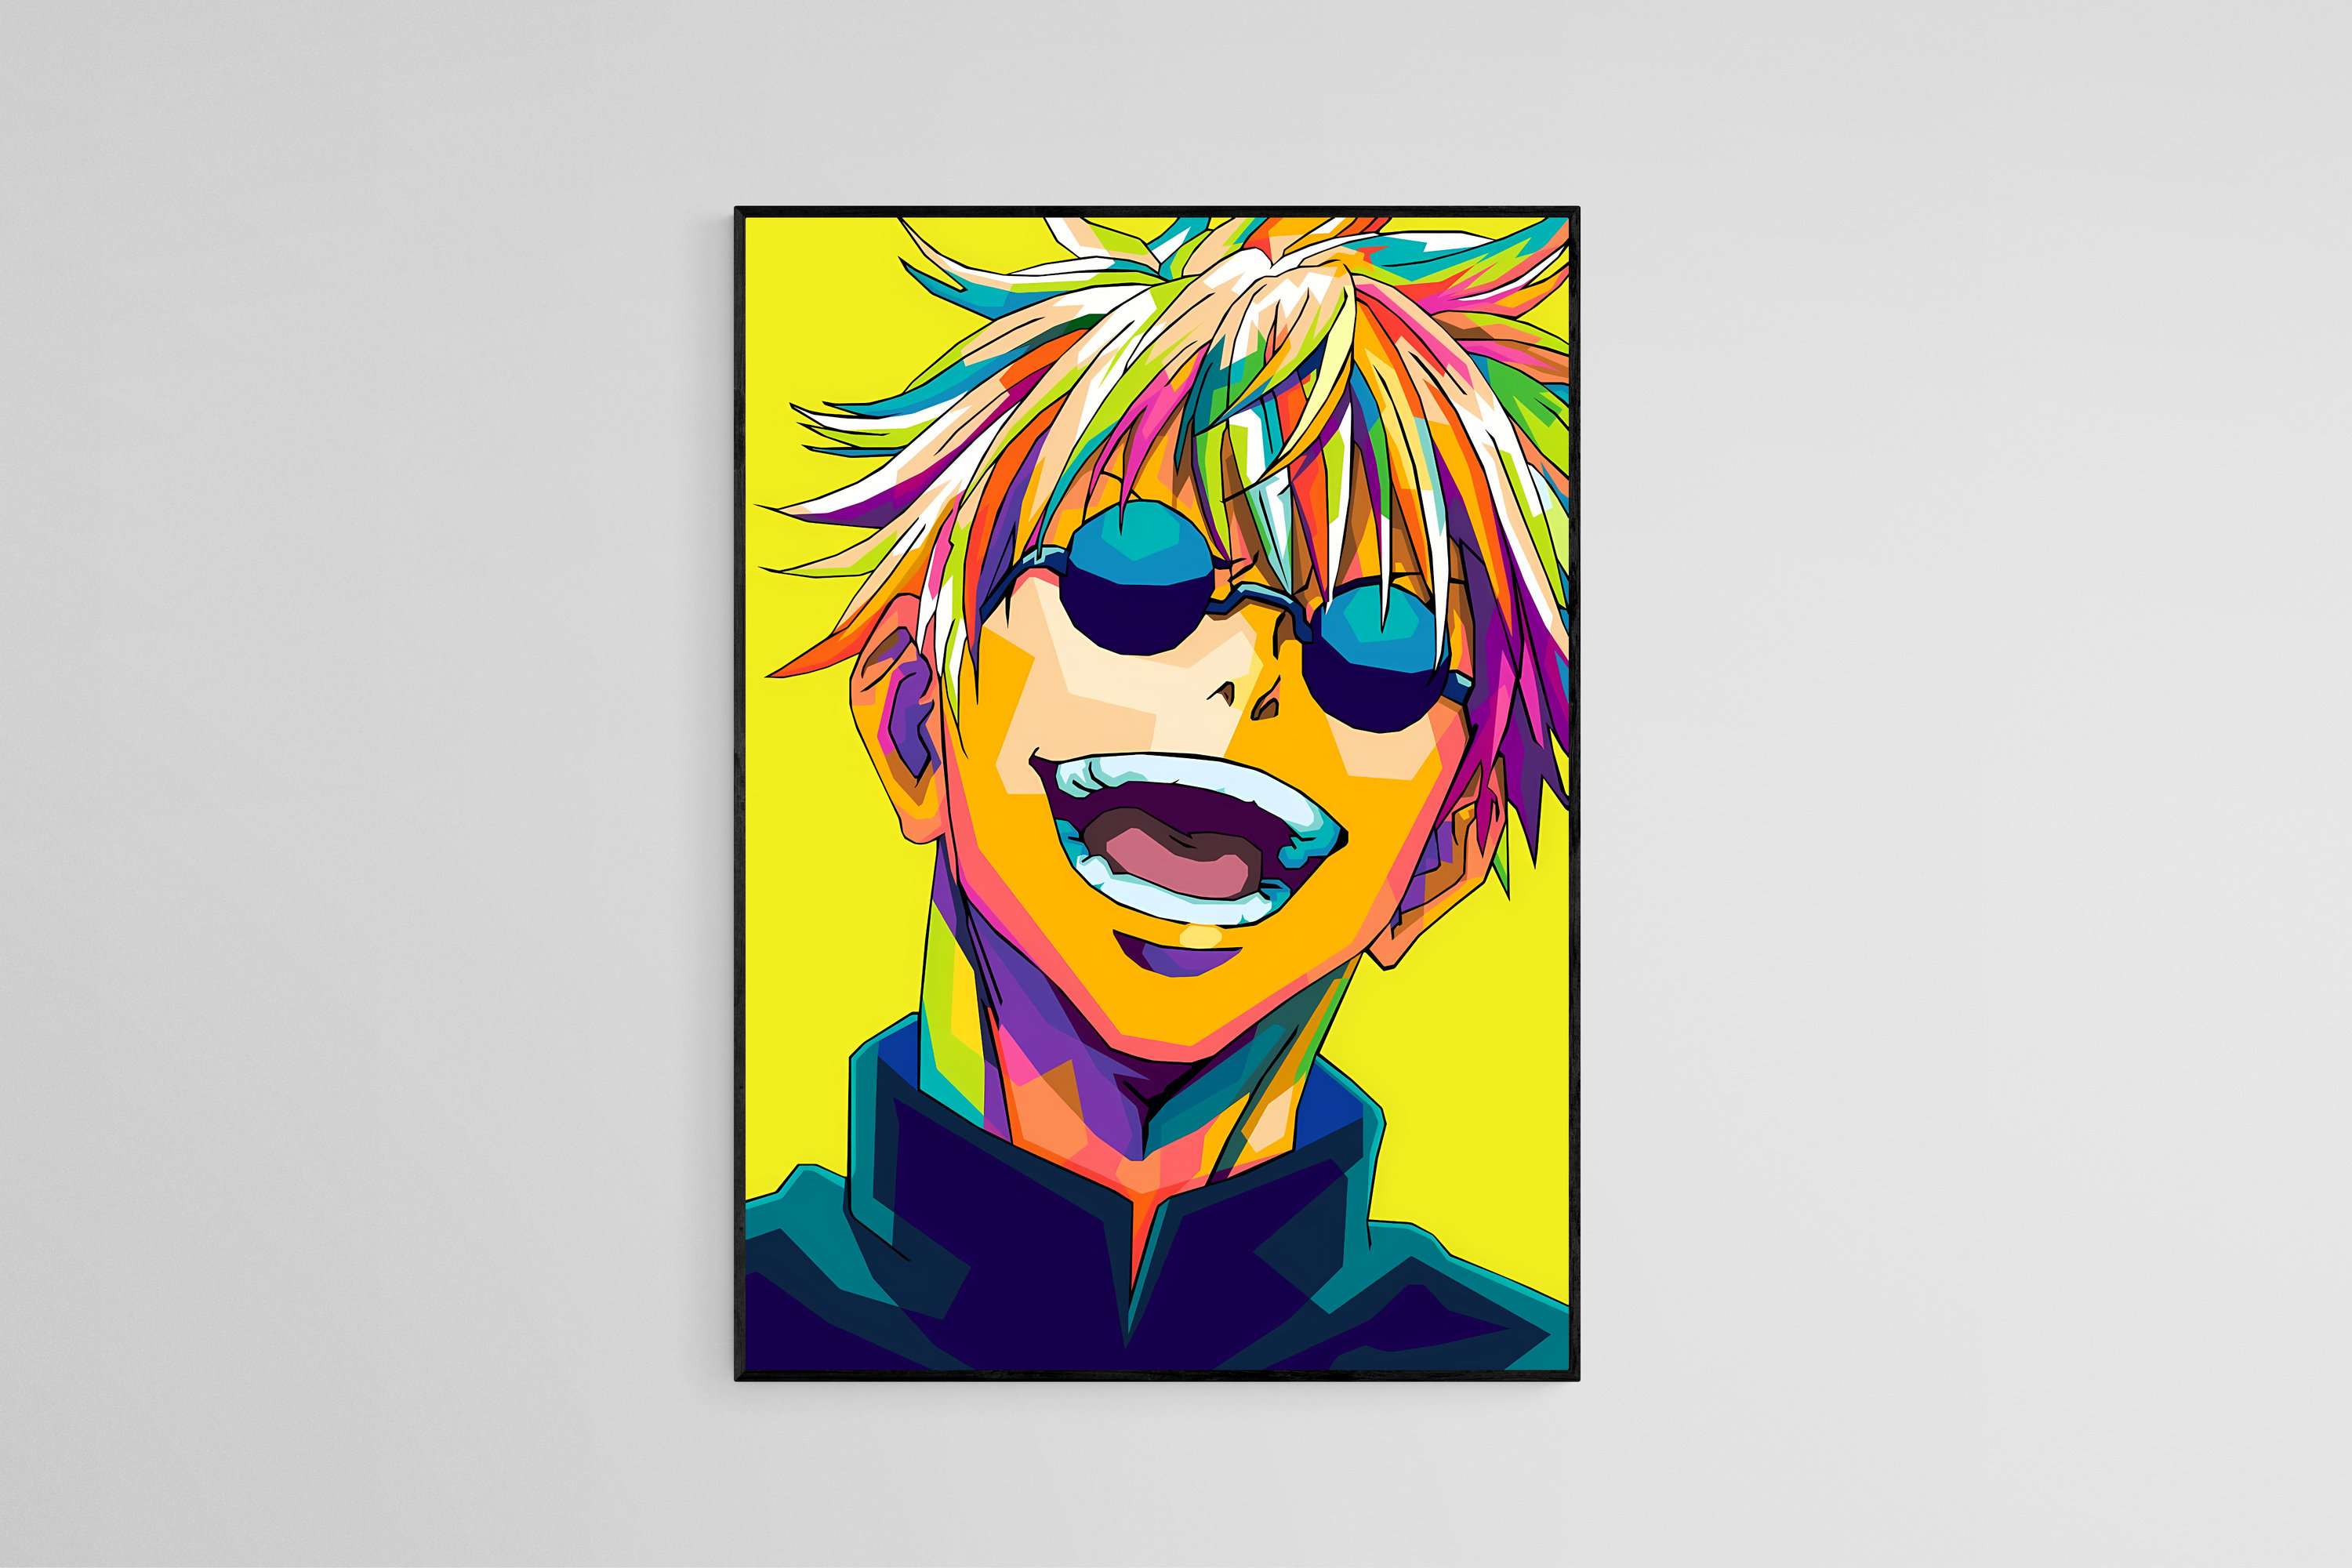  Summer Time Rendering Anime Manga Poster (2) Artworks Canvas  Poster Room Aesthetic Wall Art Prints Home Modern Decor Gifts  Framed-unframed 12x18inch(30x45cm): Posters & Prints